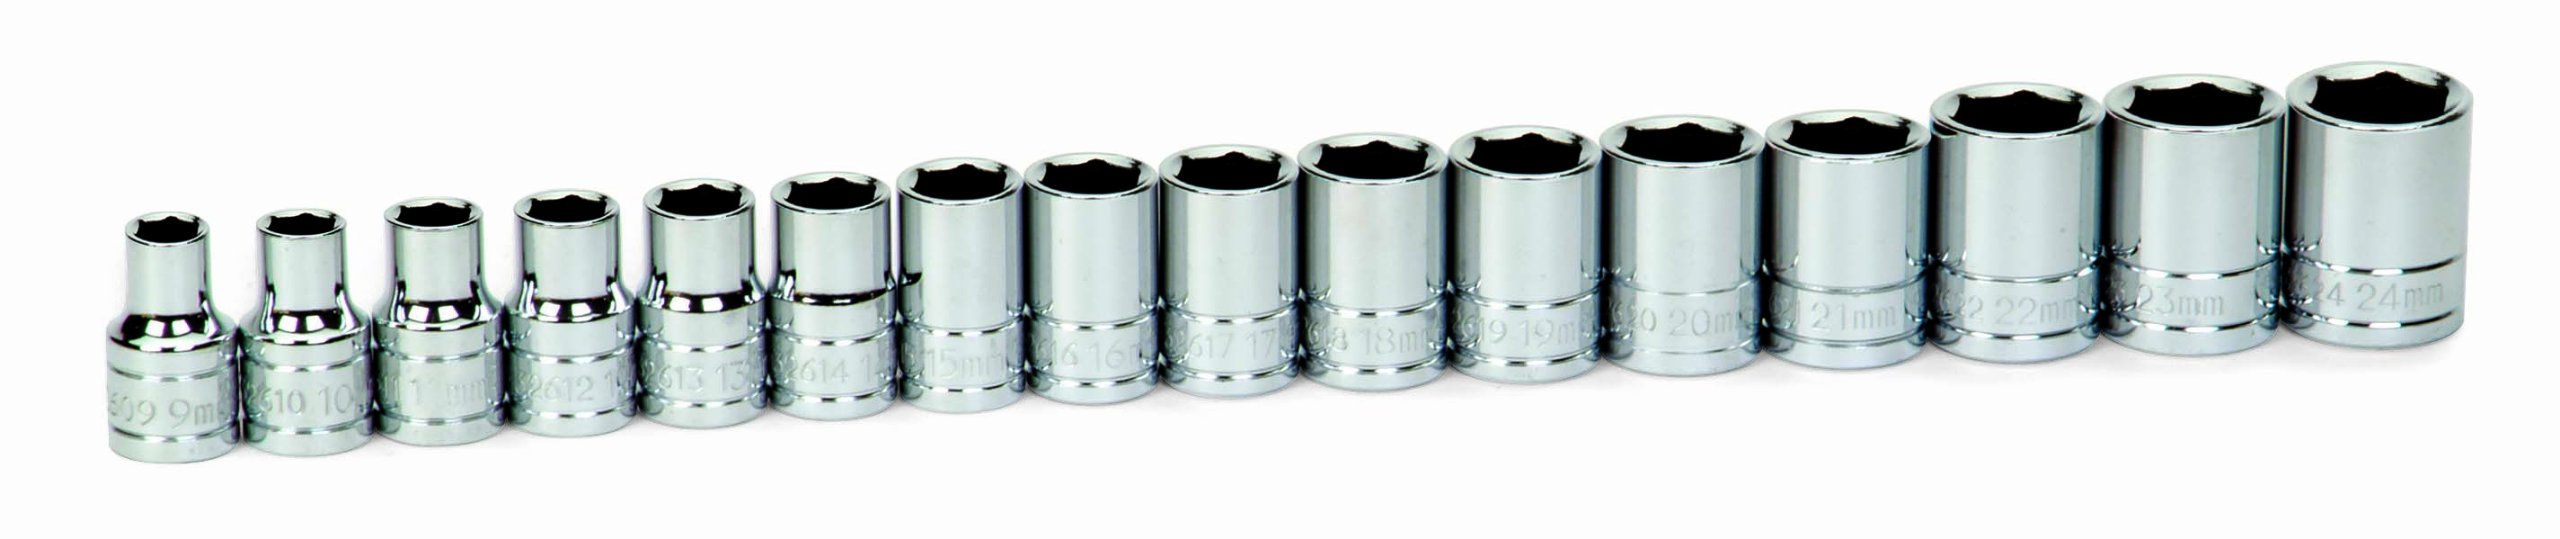 Williams 32943 16-Piece 12-Inch Drive Metric Shallow 6 Point Socket Set by Snap-on Industrial Brand JH Williams 並行輸